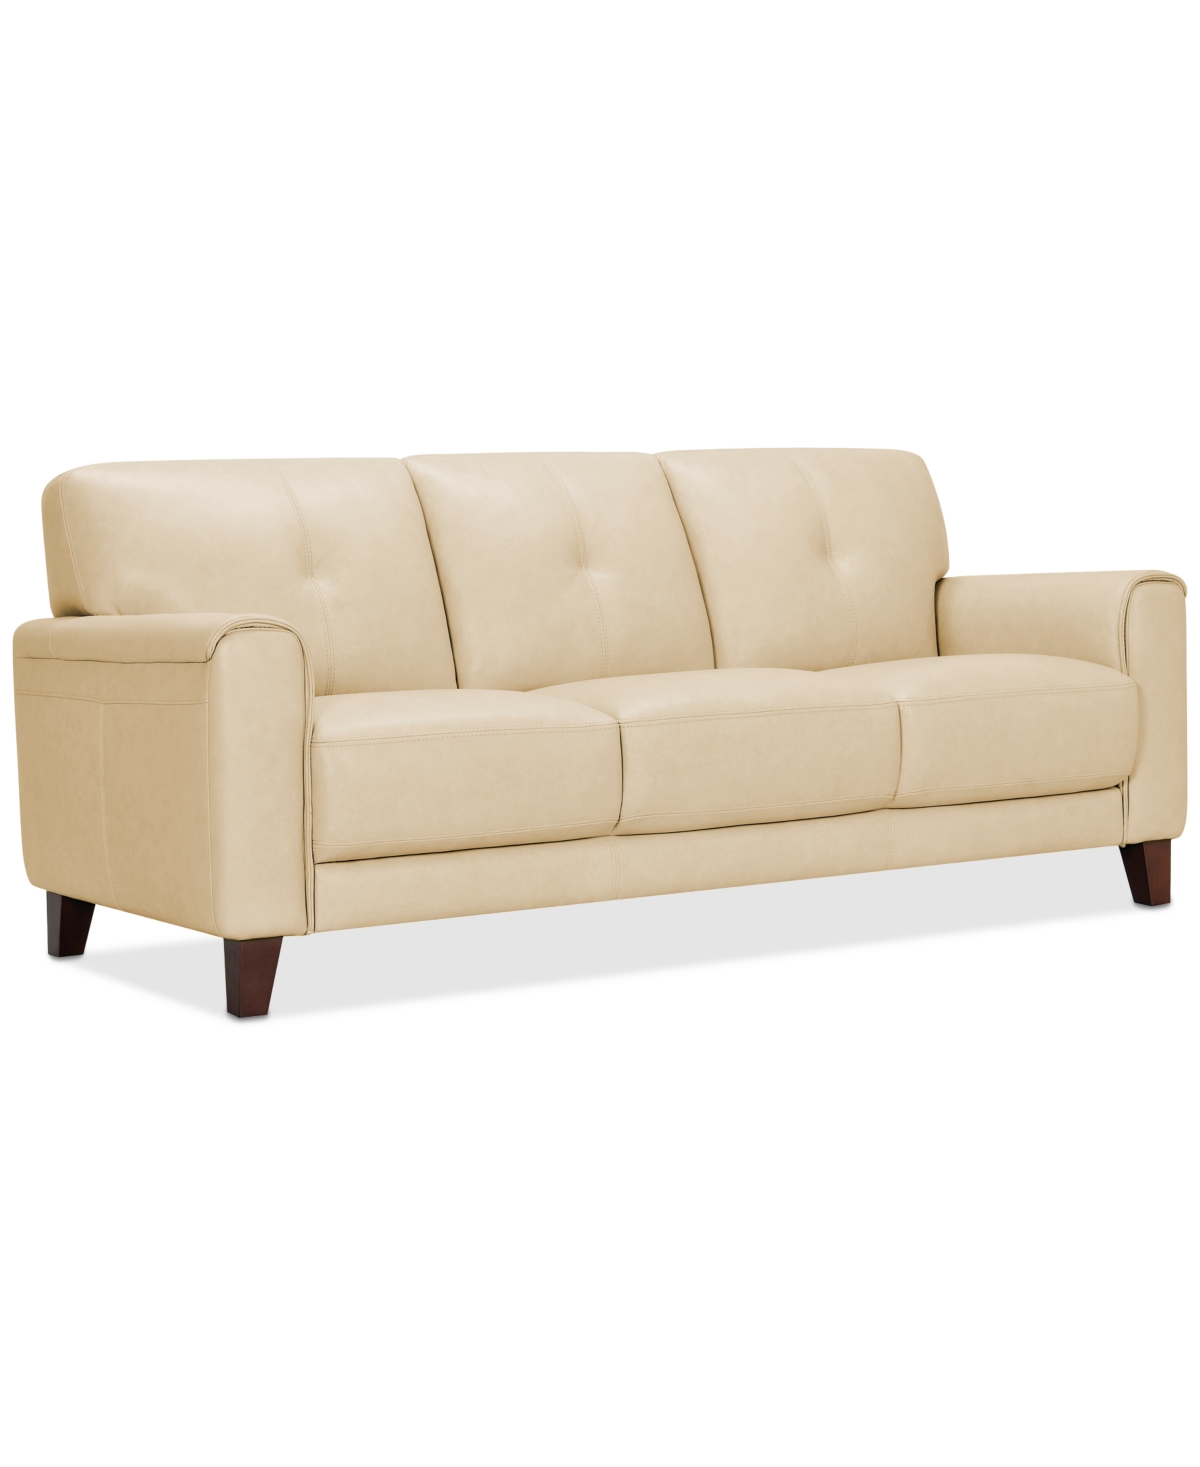 Macy's Ashlinn 84" Pastel Leather Sofa, Created For  In Butter Yellow